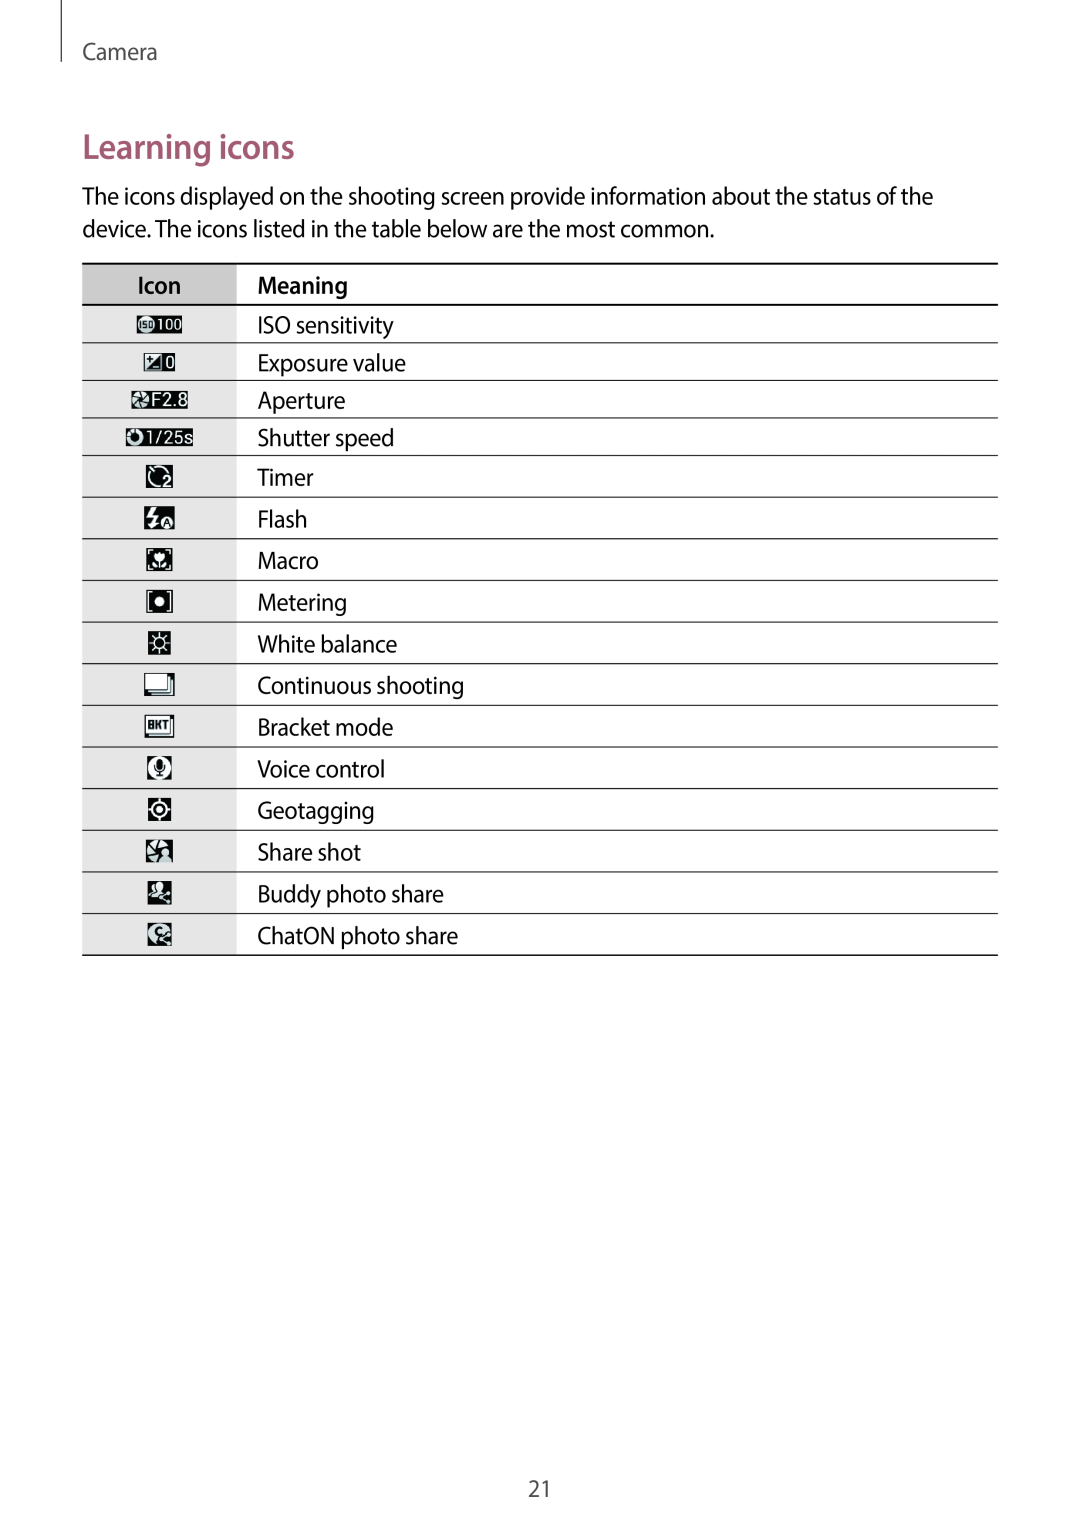 Samsung EK-GC100 user manual Learning icons, Icon Meaning, Camera 